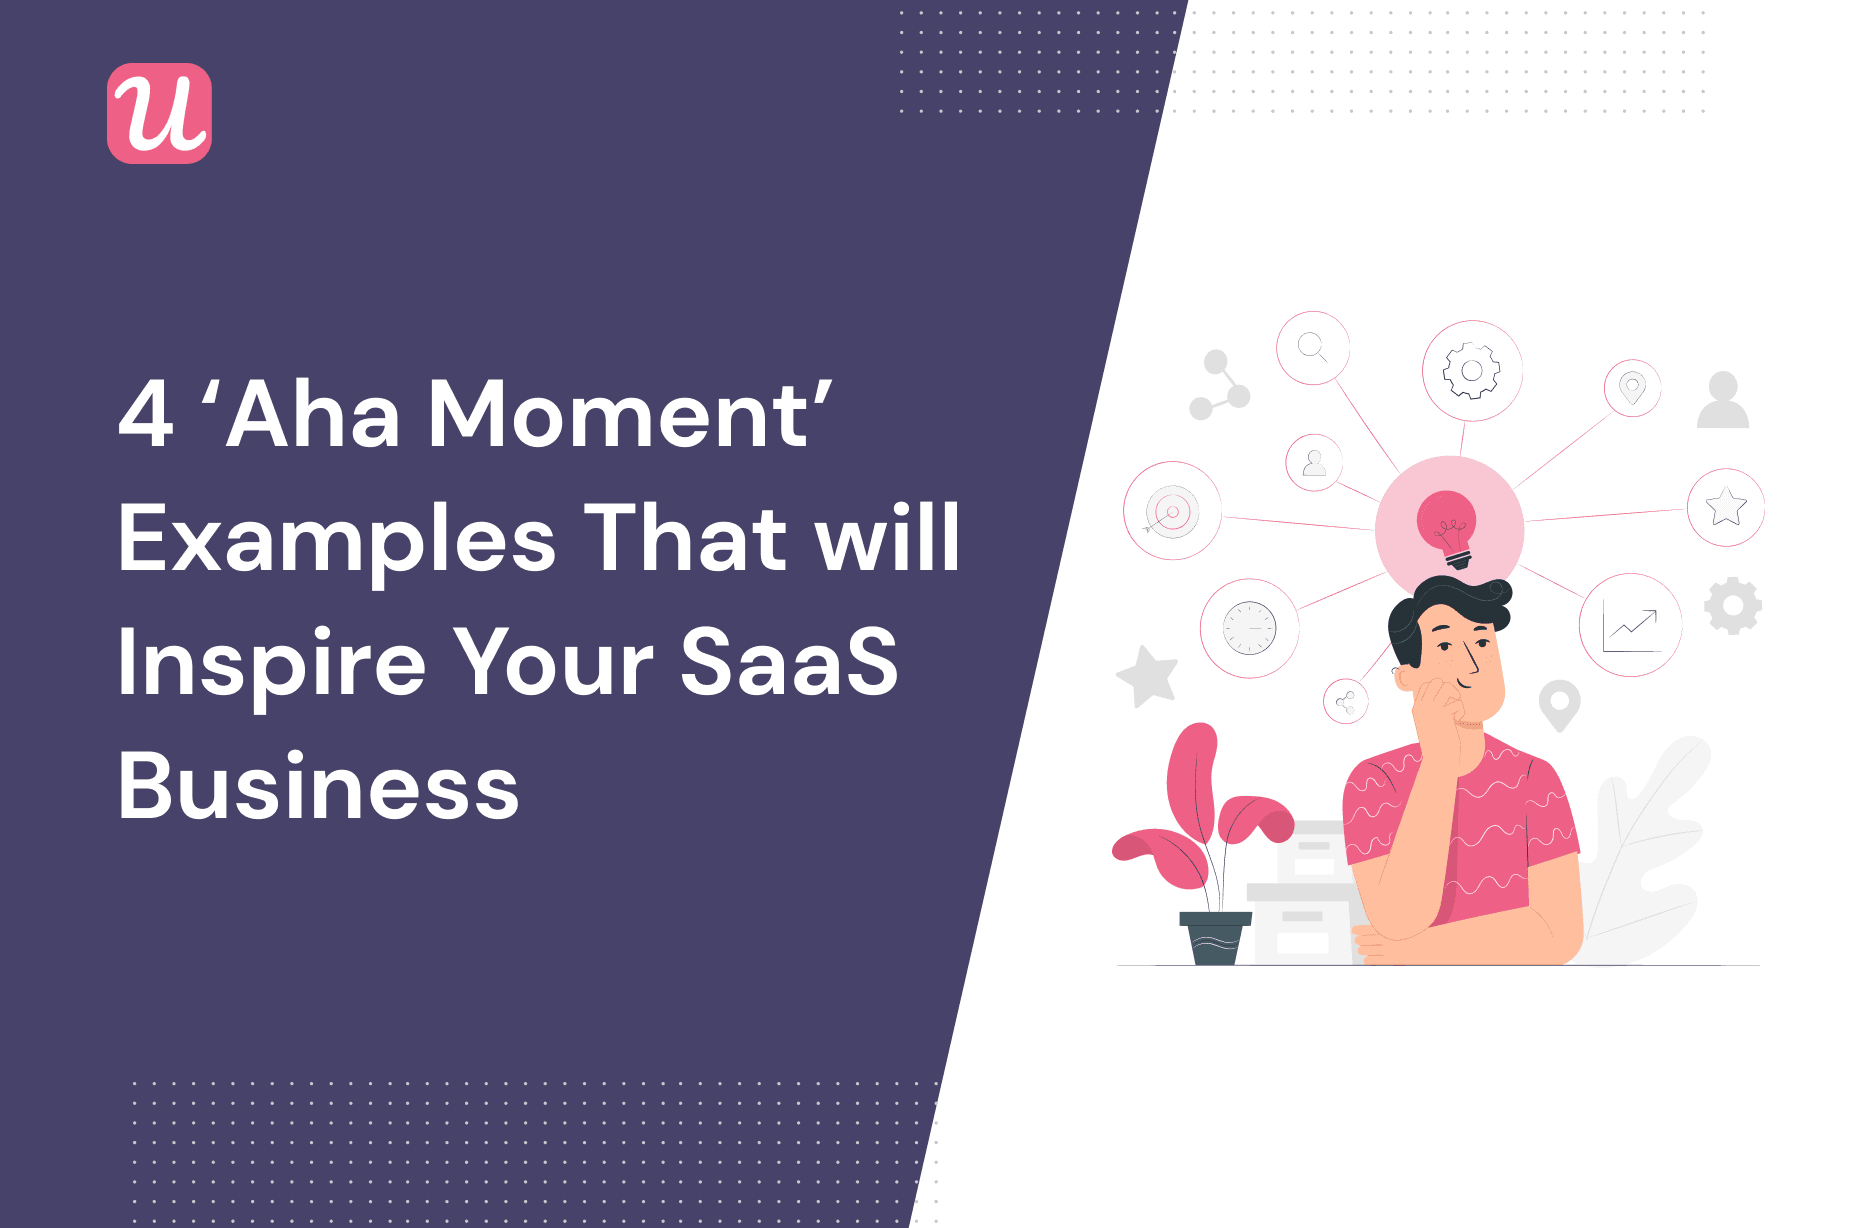 4 Aha Moment Examples That Will Inspire Your SaaS Business